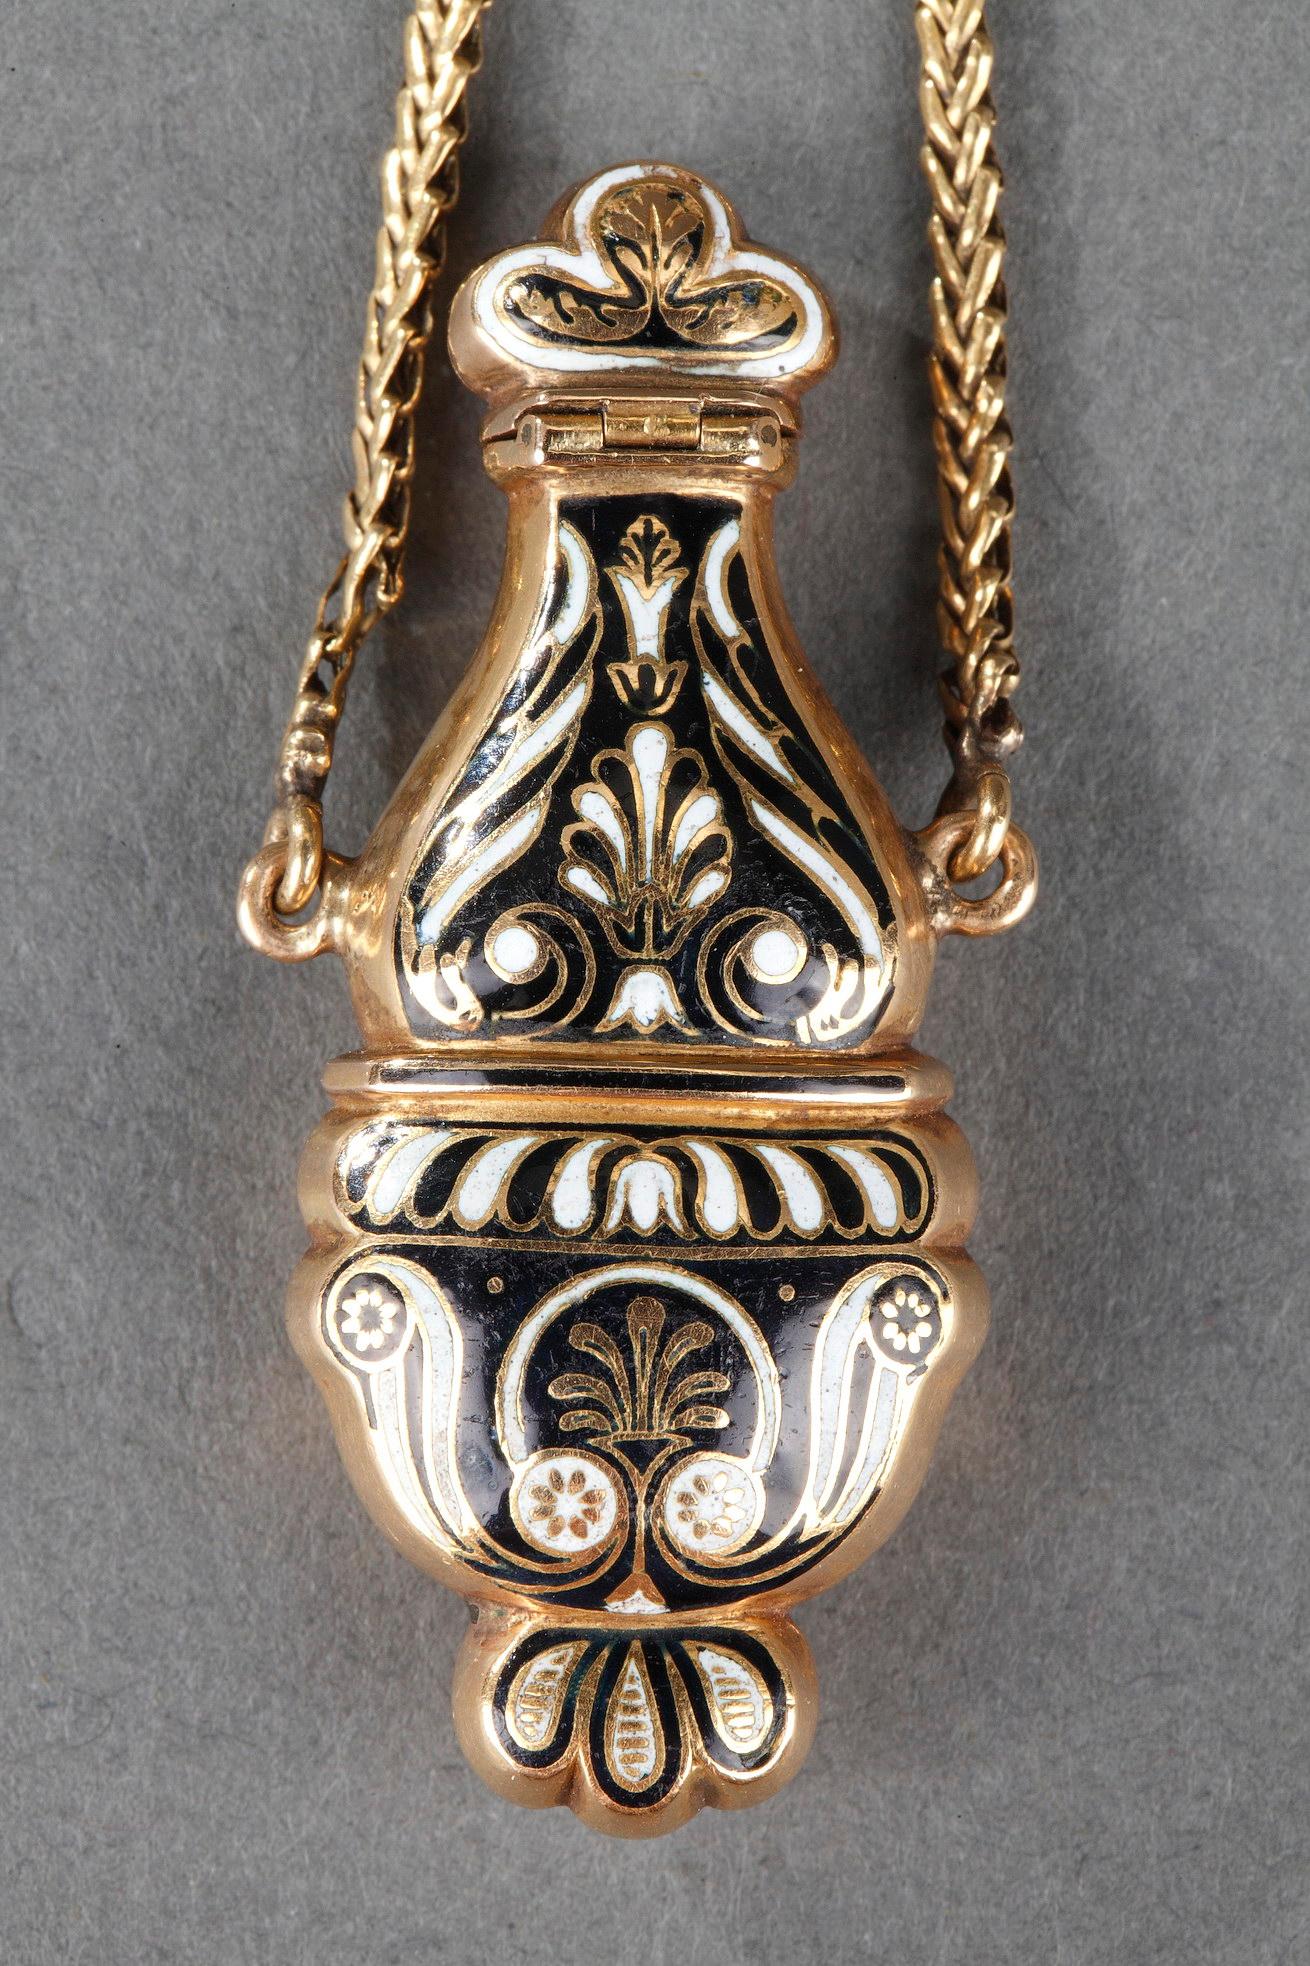 Gold and Enamel Perfum Bottle, Restauration Period, Circa 1830-1840 For Sale 1